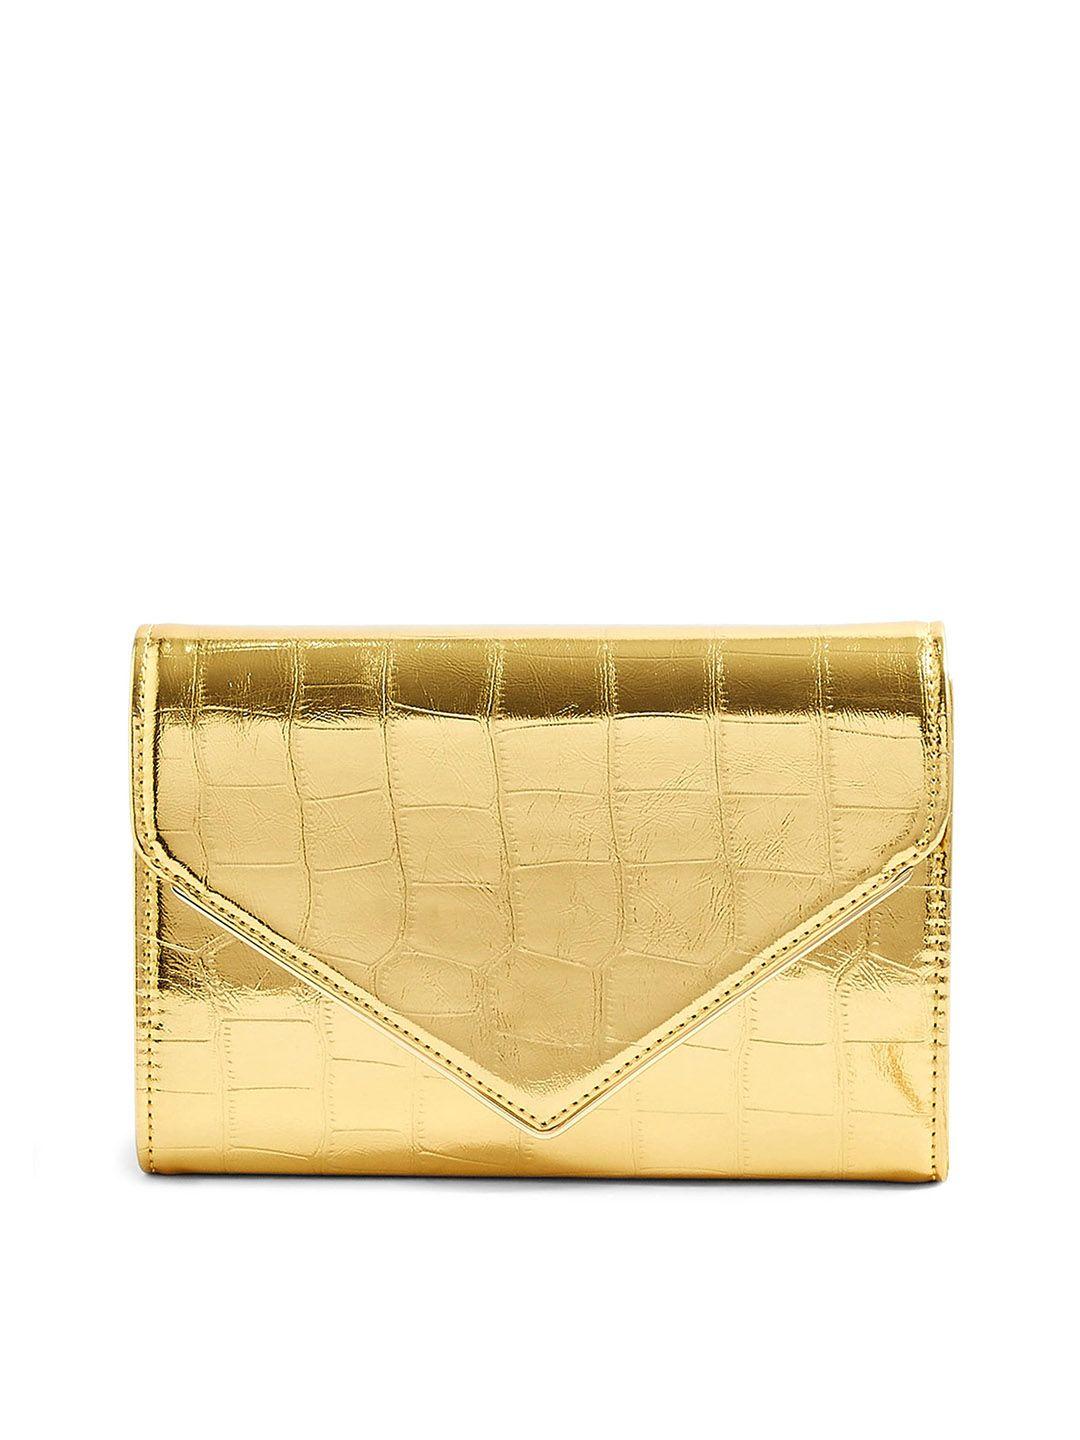 accessorize gold-toned  structured sling bag